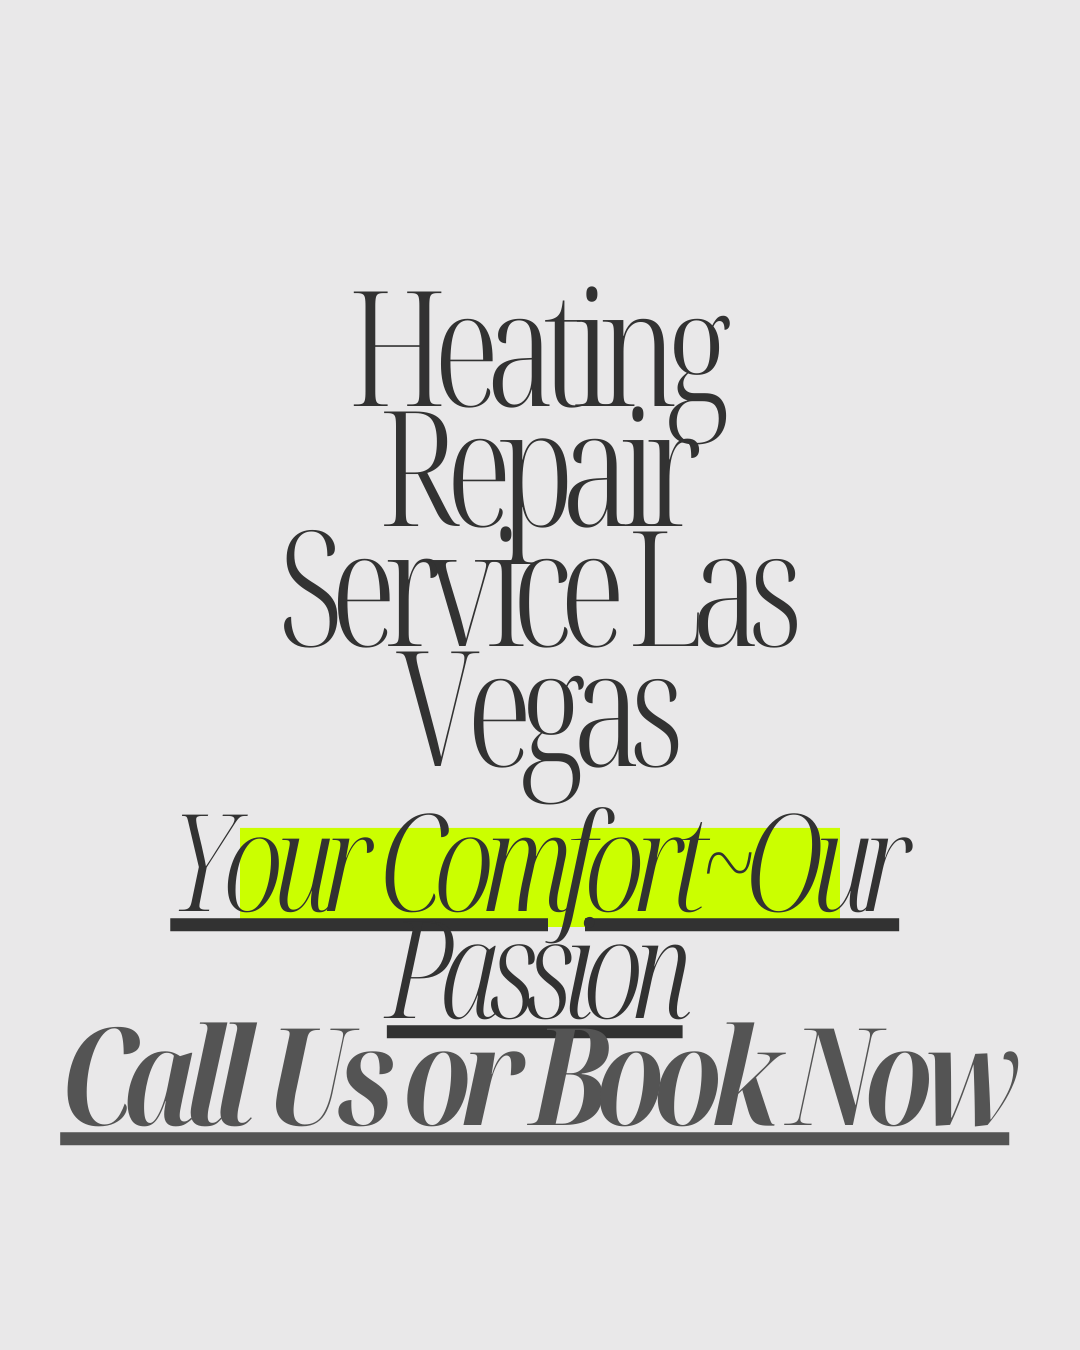 Trust the #1 Fast Professionals for Heating Repair Service in Las Vegas: Stay Warm All Season